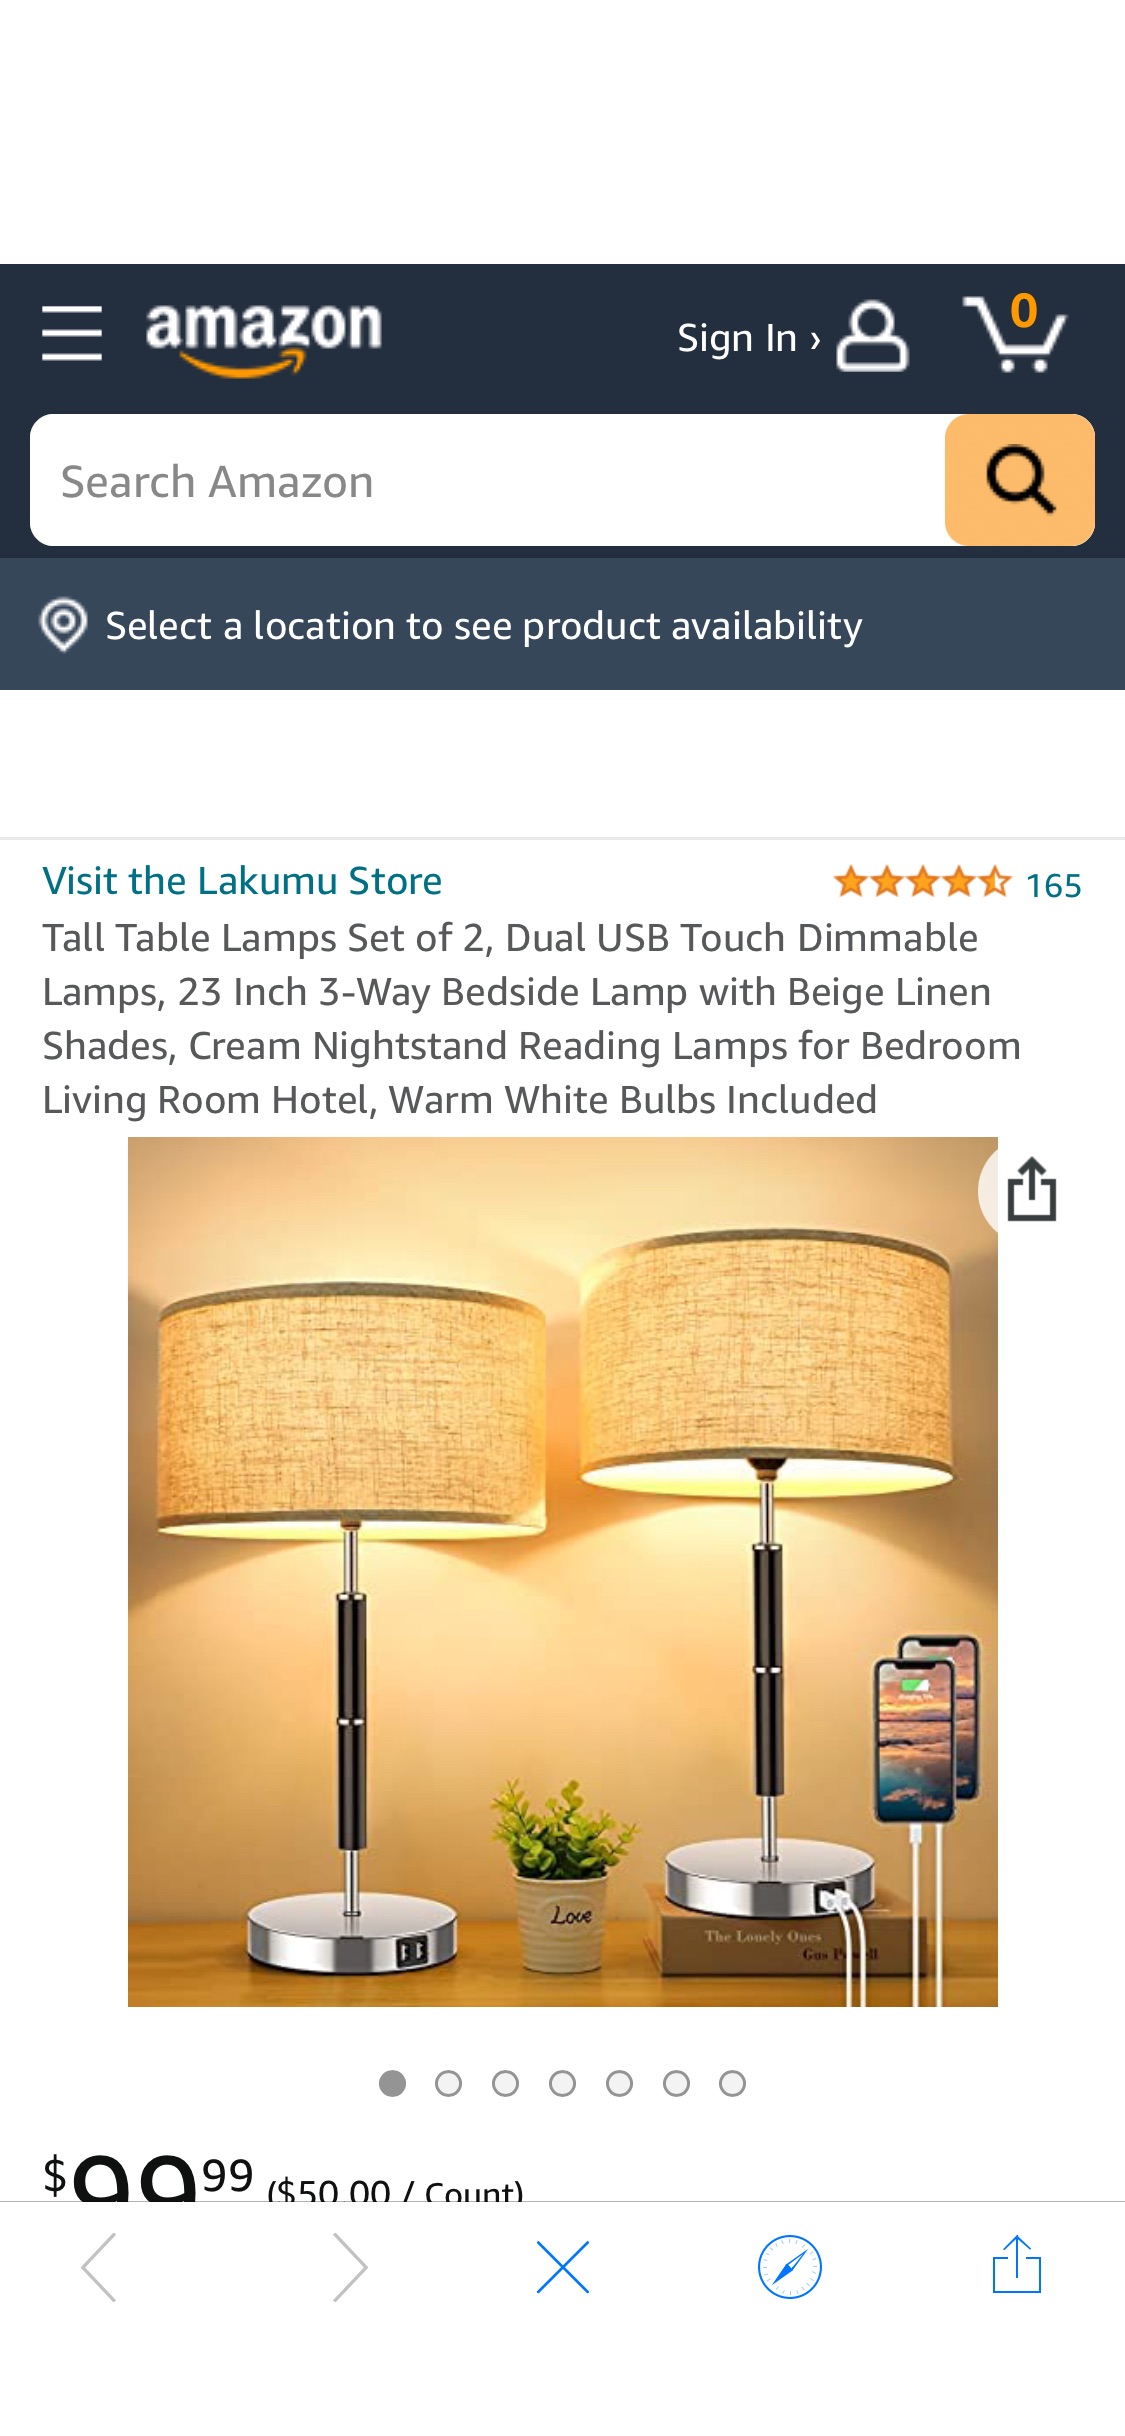 Tall Table Lamps Set of 2, Dual USB Touch Dimmable Lamps, 23 Inch 3-Way Bedside Lamp with Beige Linen Shades, Cream Nightstand Reading Lamps for Bedroom Living Room Hotel, Warm White Bulbs com 灯